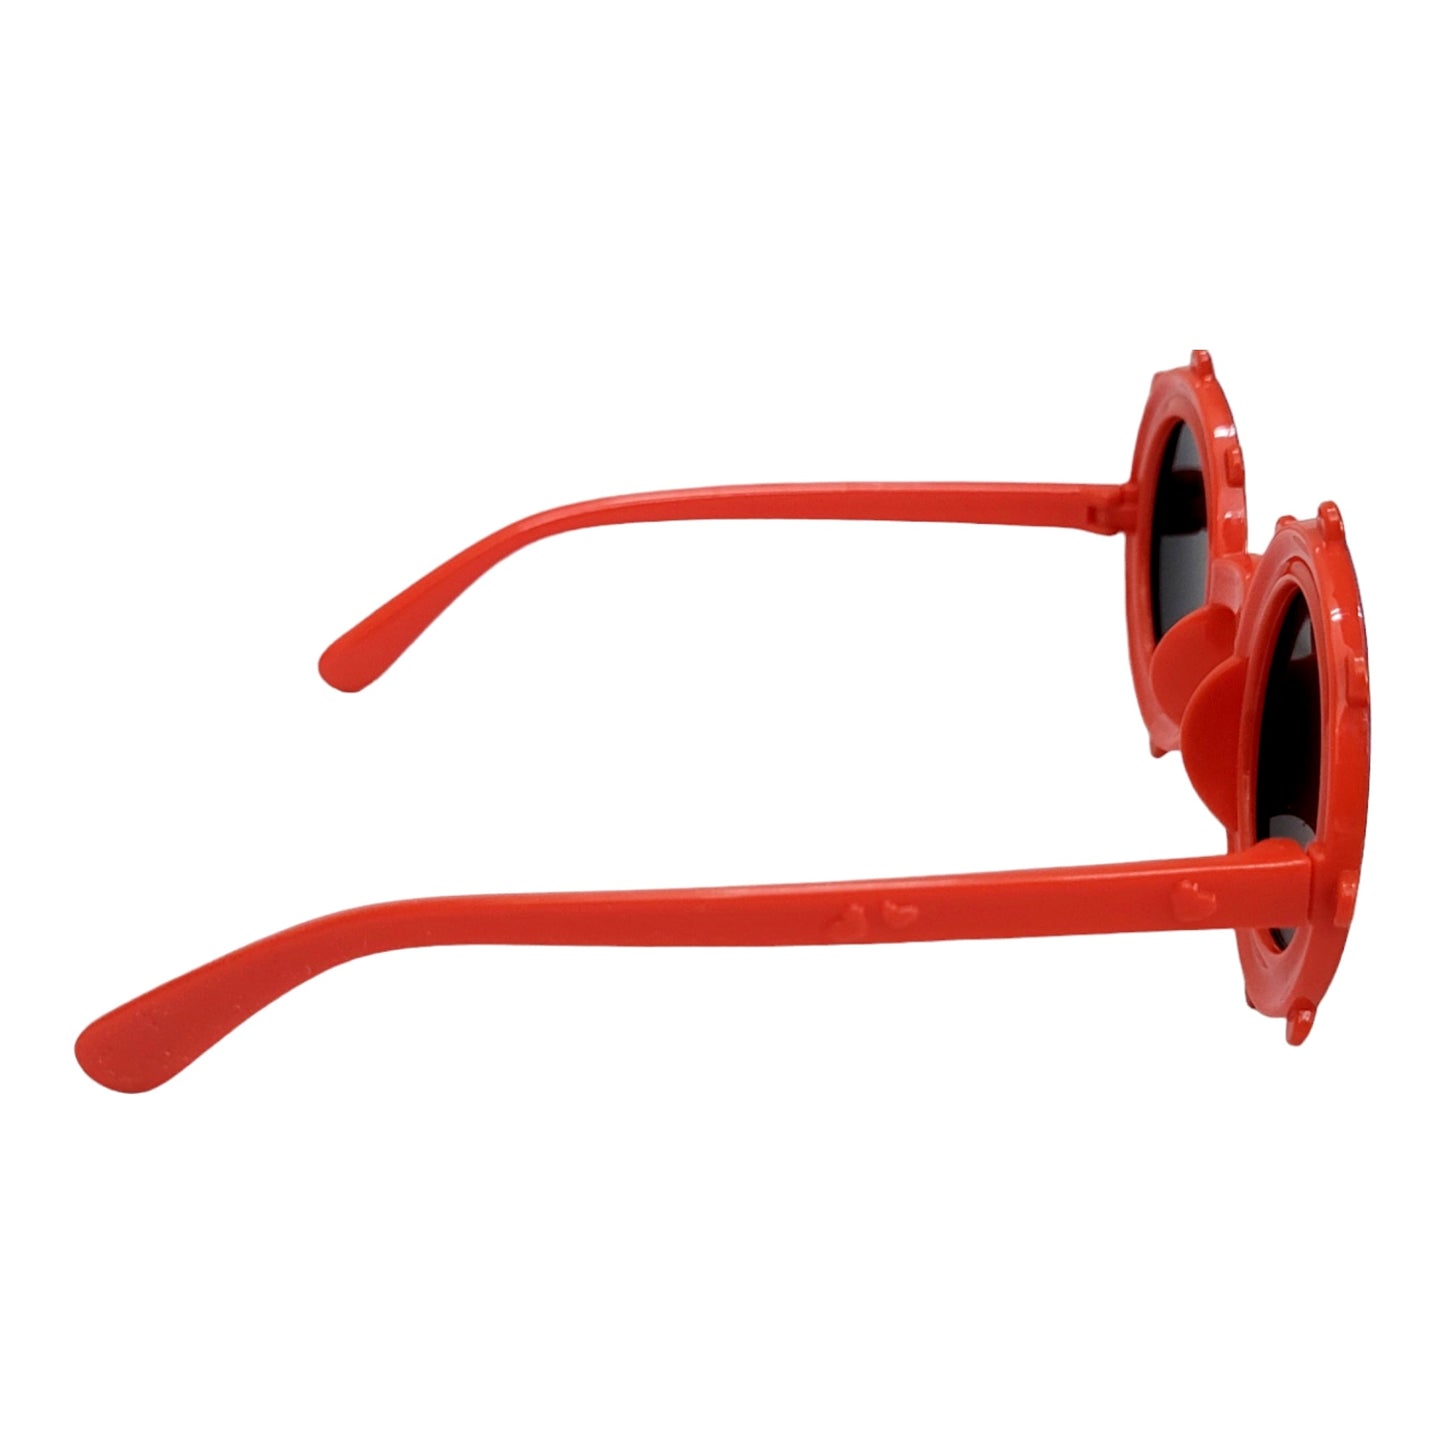 Round Shape Sunglasses for kids - UV Protected Sunglasses - ( 3yrs to 8yrs ) – affaires-2040-Red